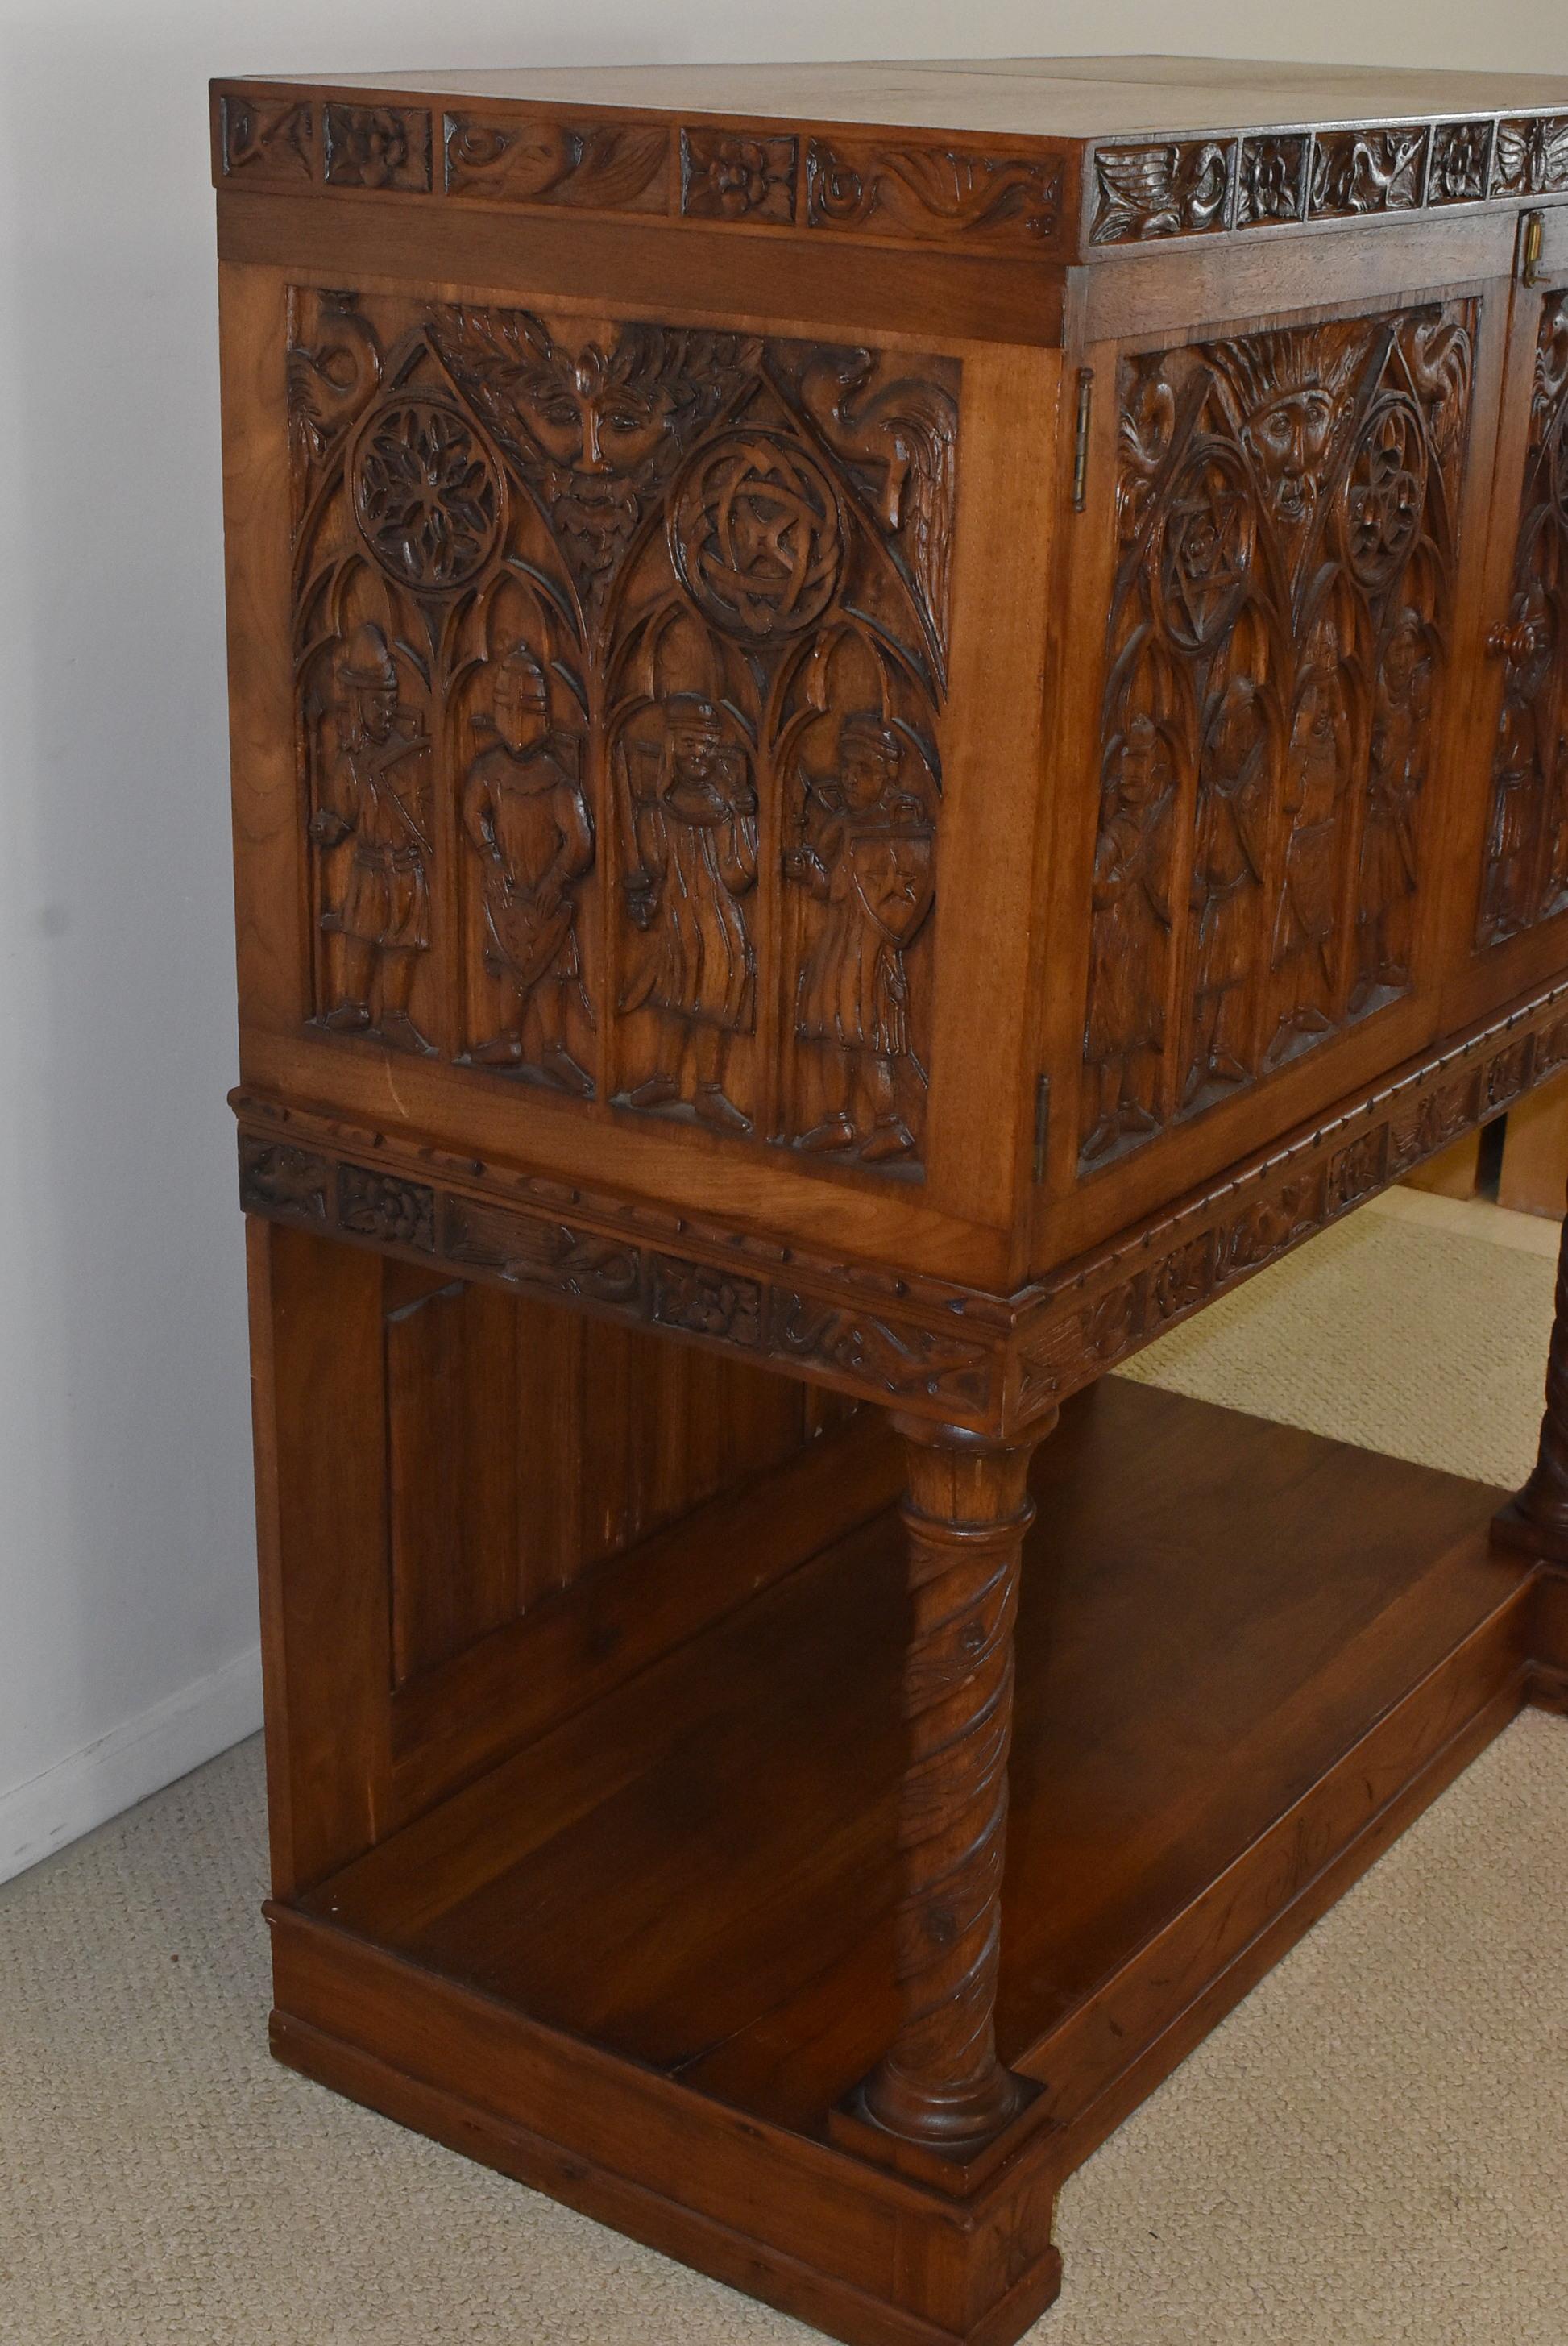 Antique carved walnut Gothic Revival liquor cabinet. Knights, birds, foxes and mythical faces depicted. Rope turned pillars with a bottom shelf. Draped carved back panels. Measure: 42